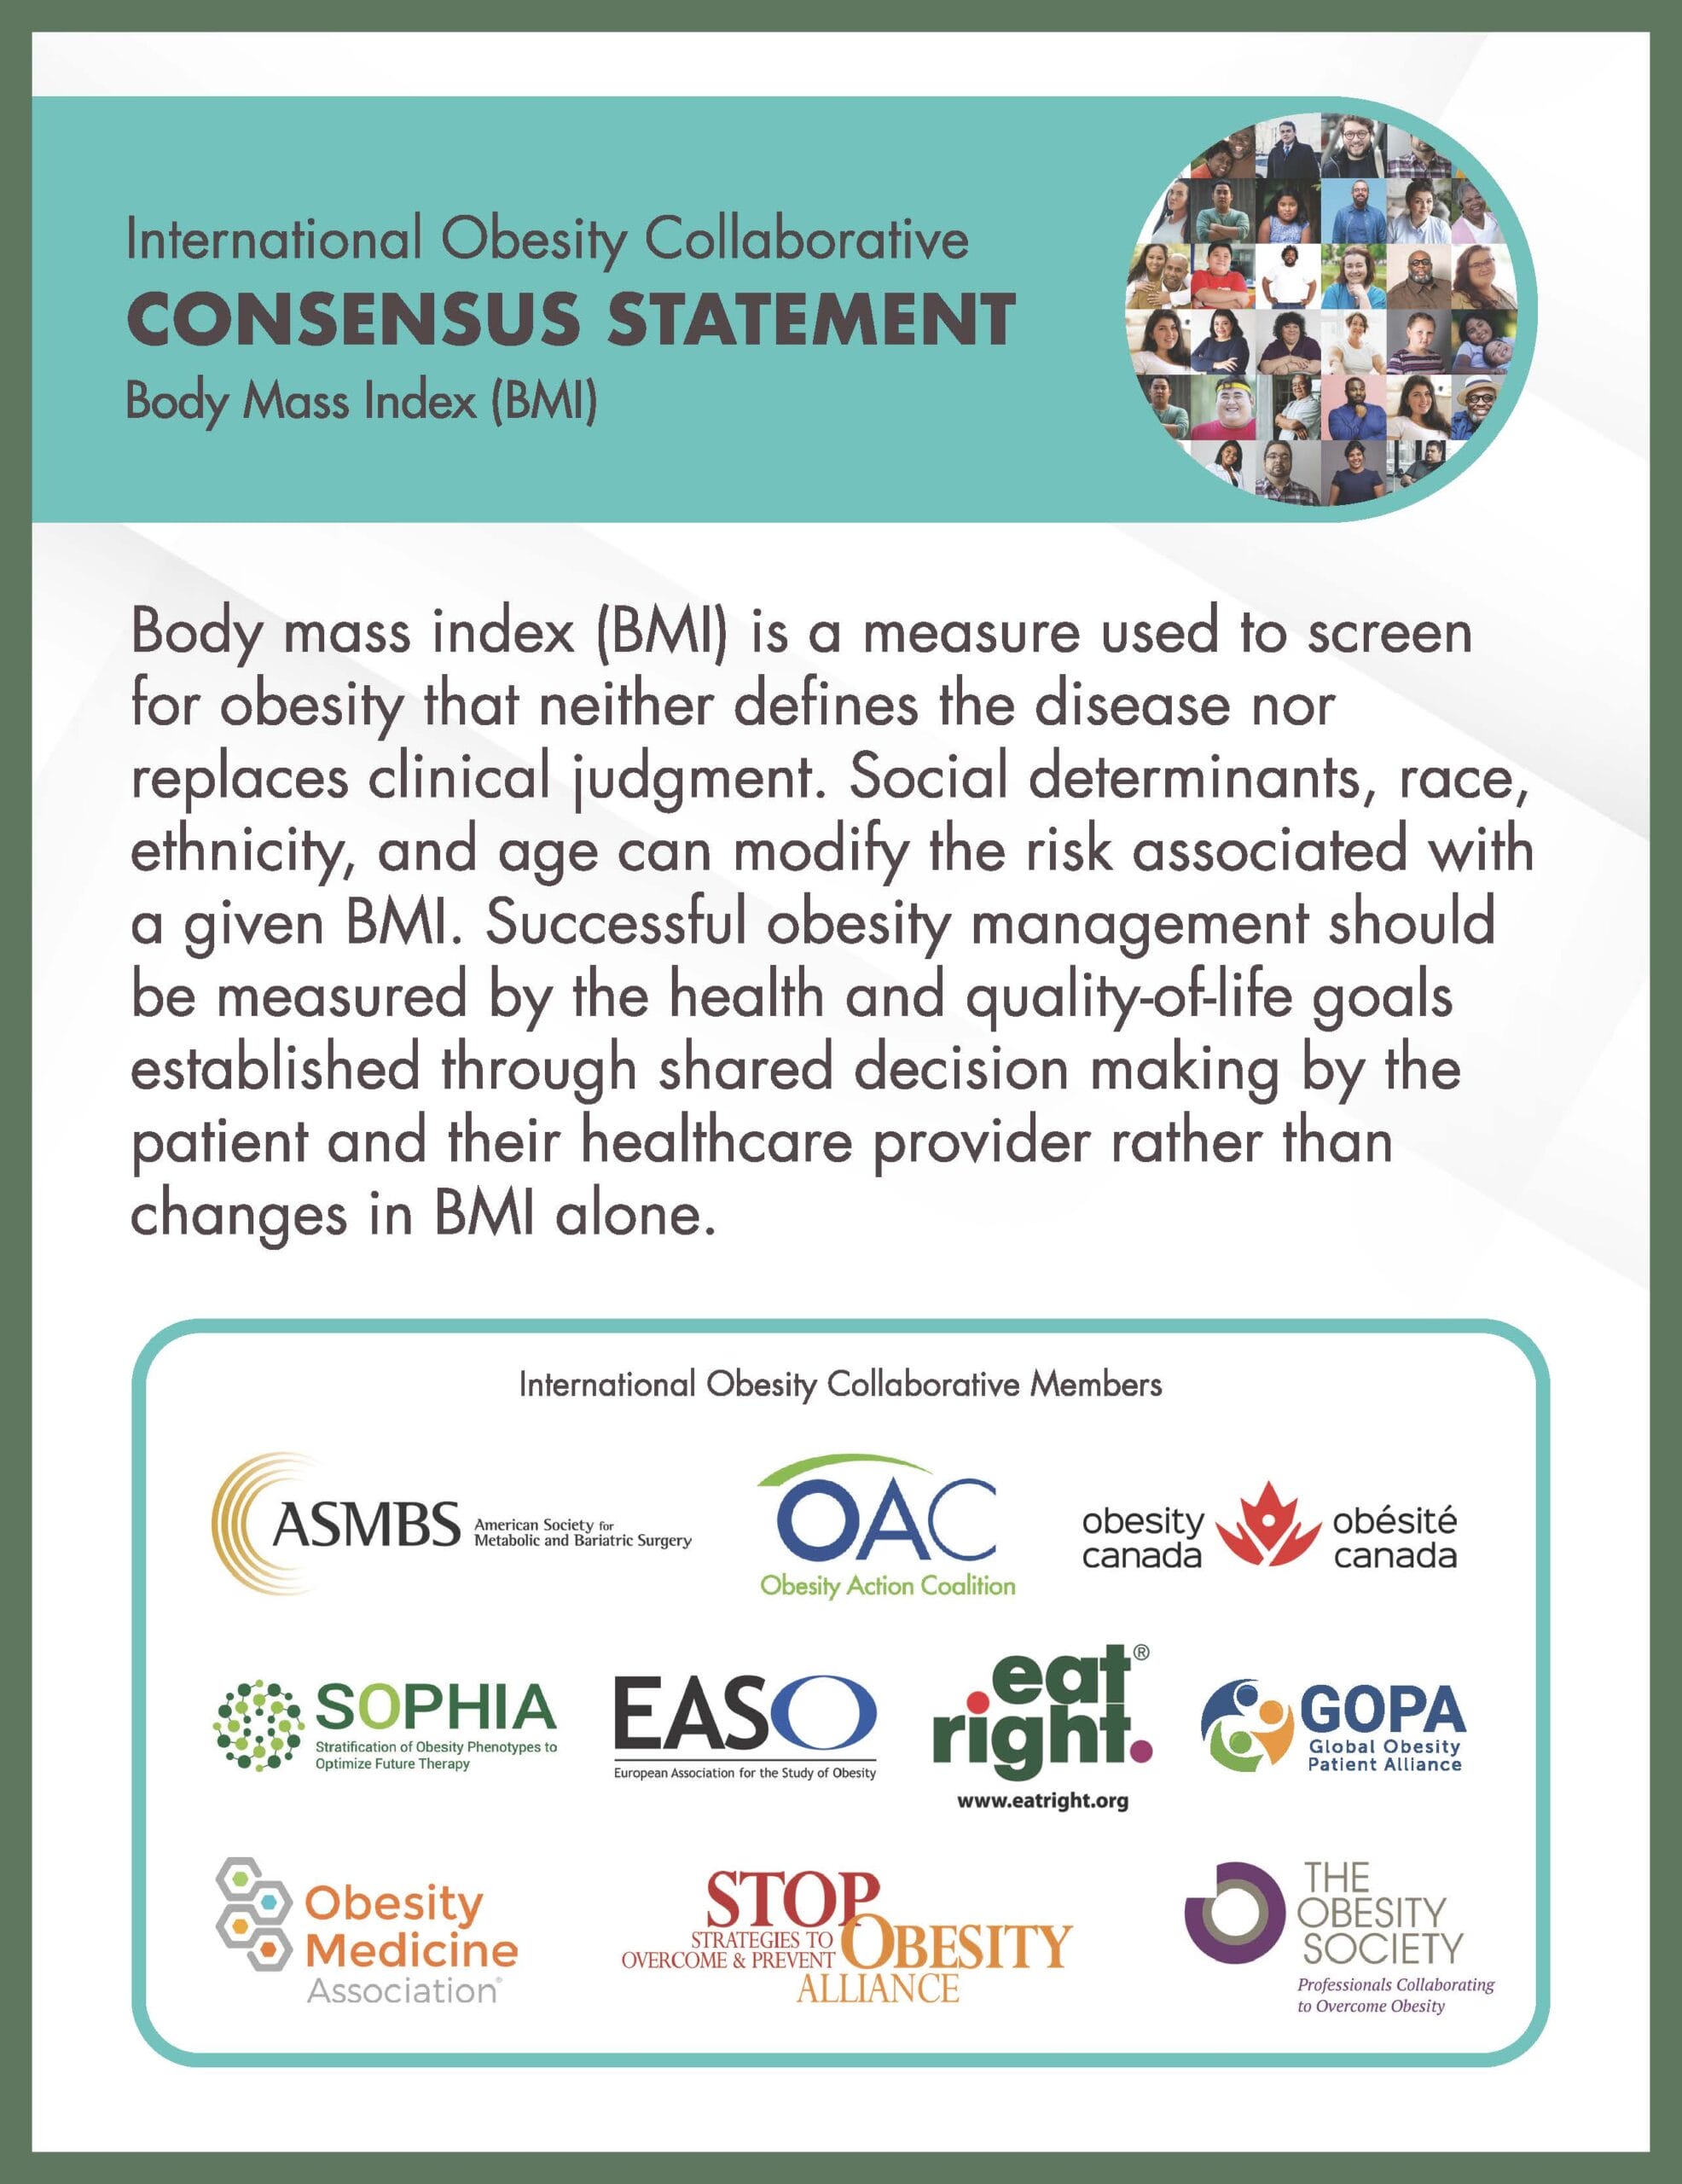 Infographic by international obesity collaborative explaining bmi as a health measure, influenced by factors like race and ethnicity, surrounded by logos of supporting organizations.